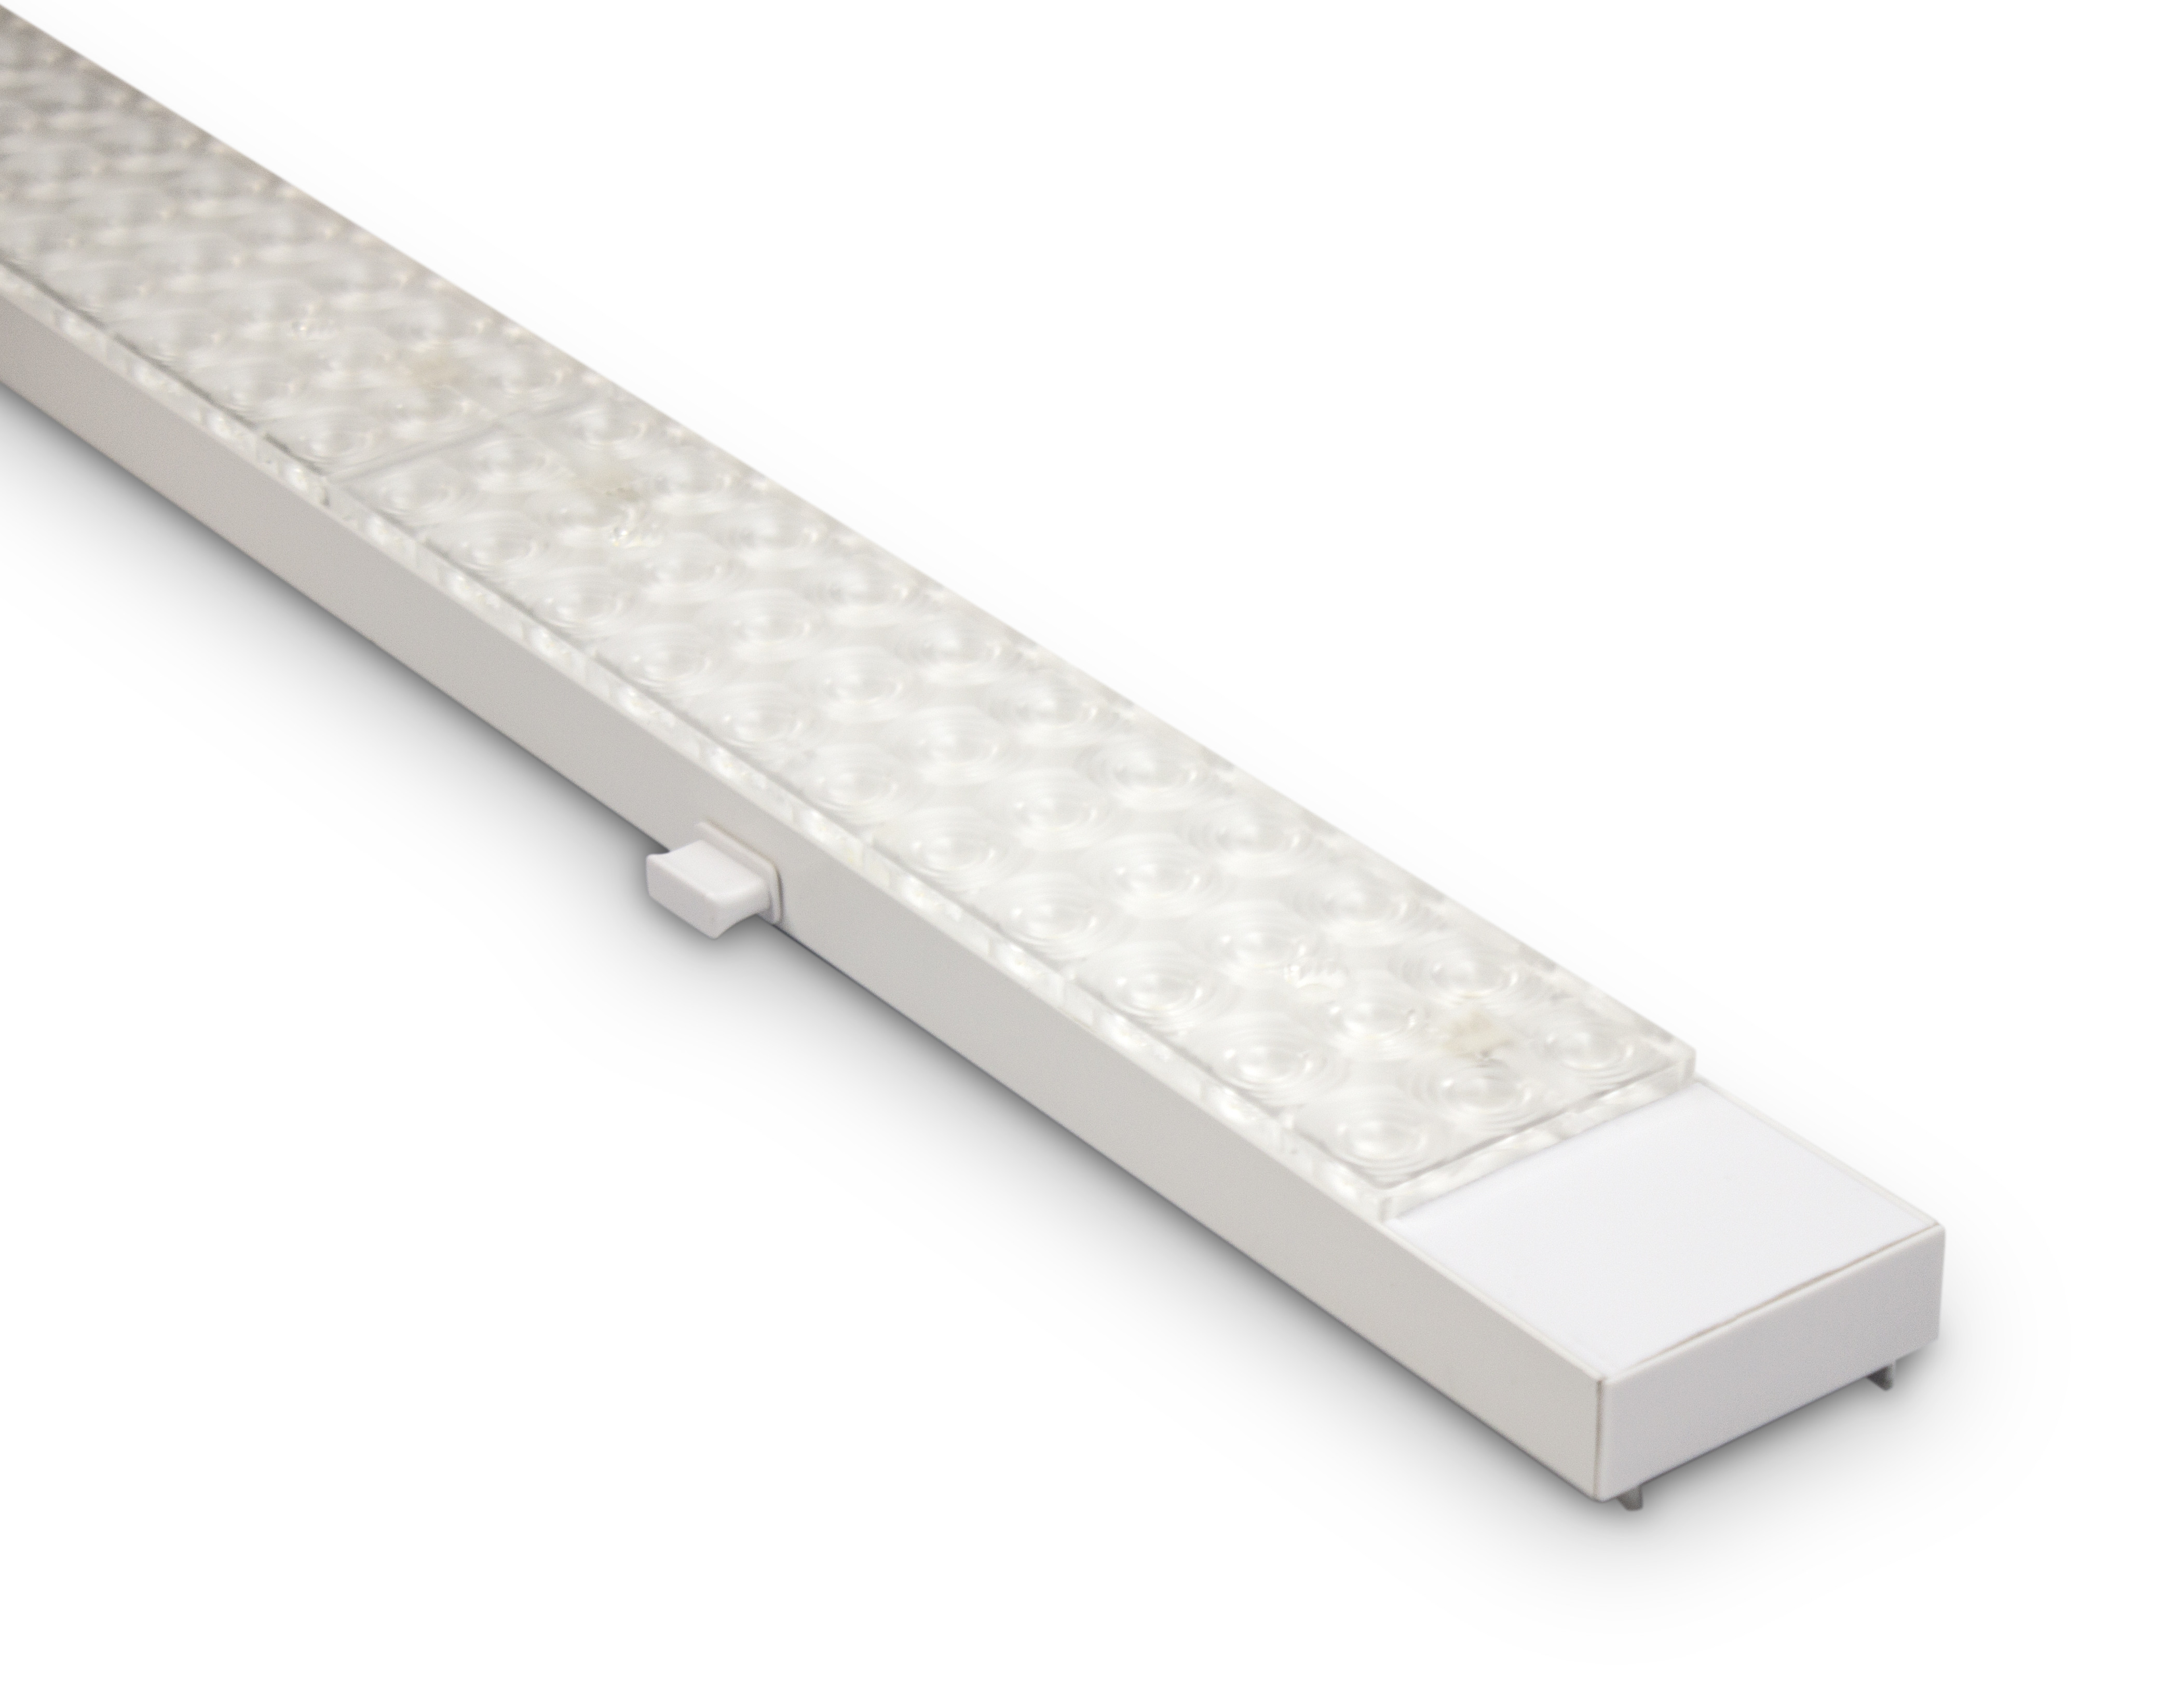 Suspended 60w Replaceable LED Module for fluorescent light tubes